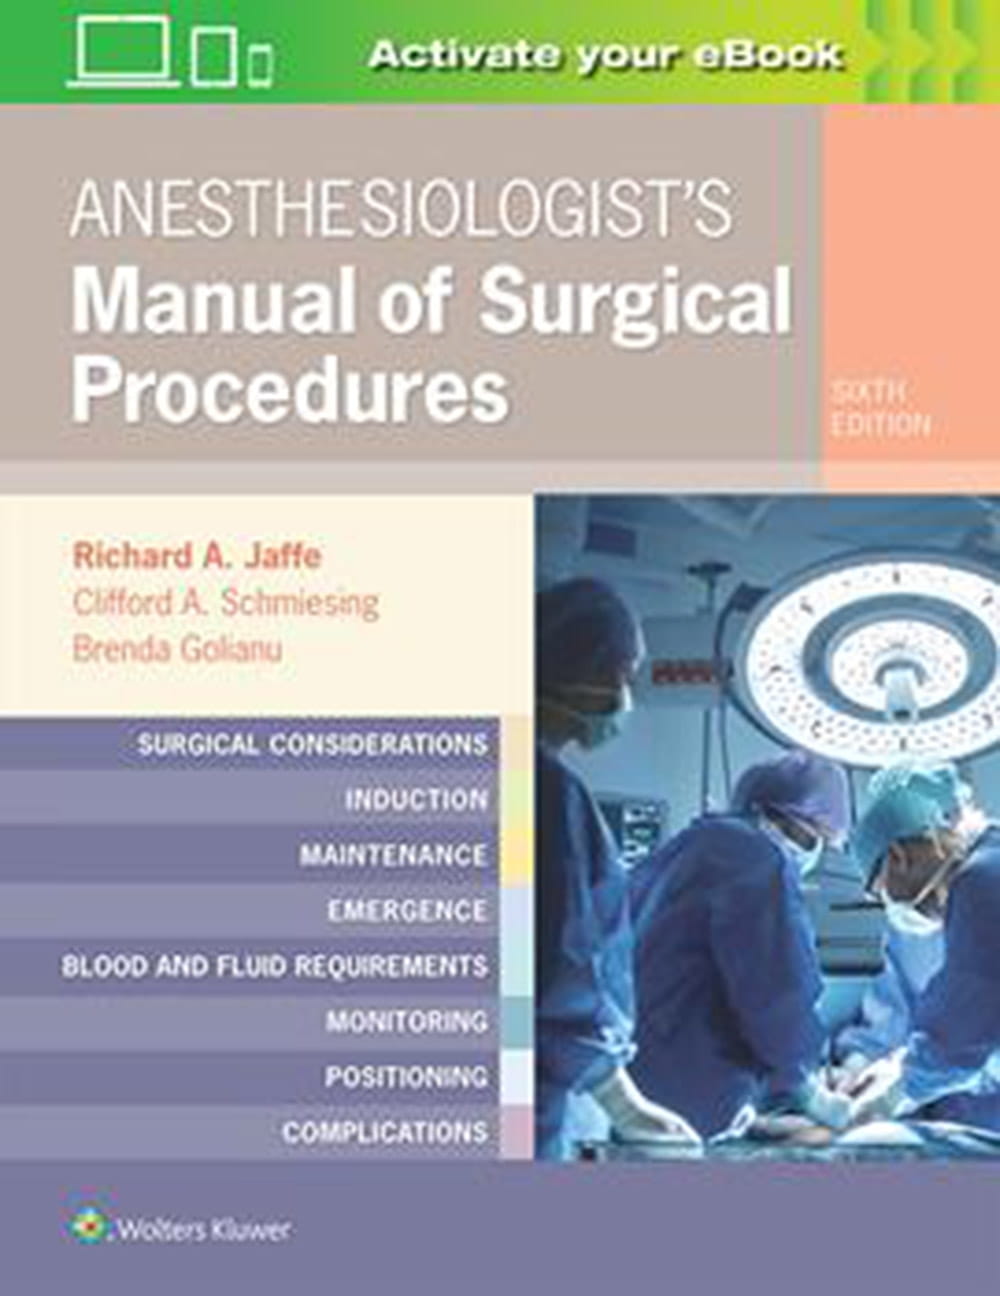 Anesthesiologist’s